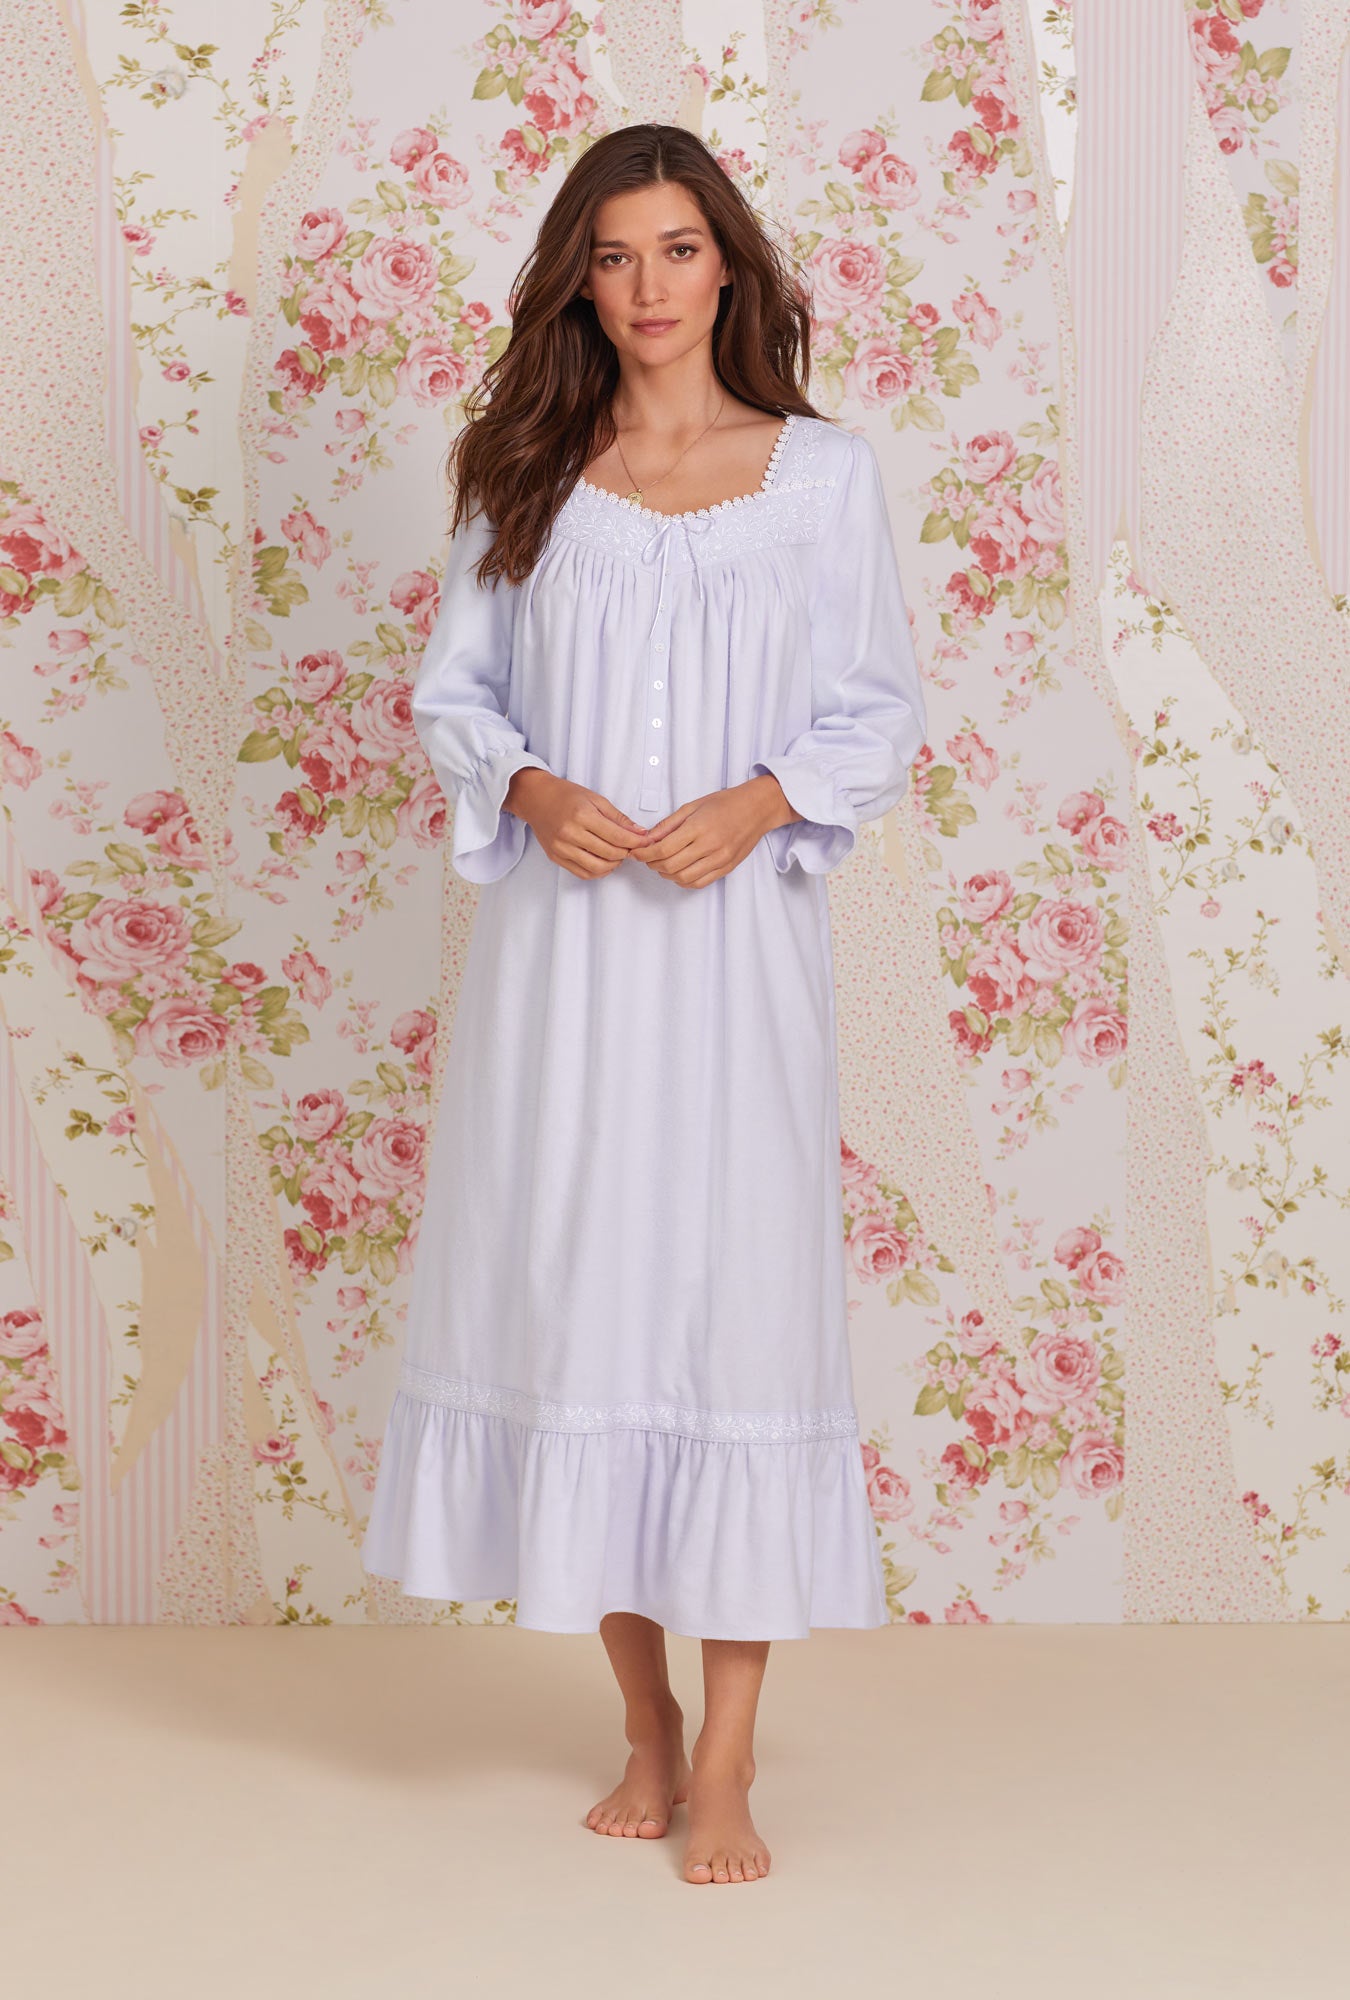 A lady wearing white Long Sleeve Cotton Flannel Embroidery Long Nightgown 